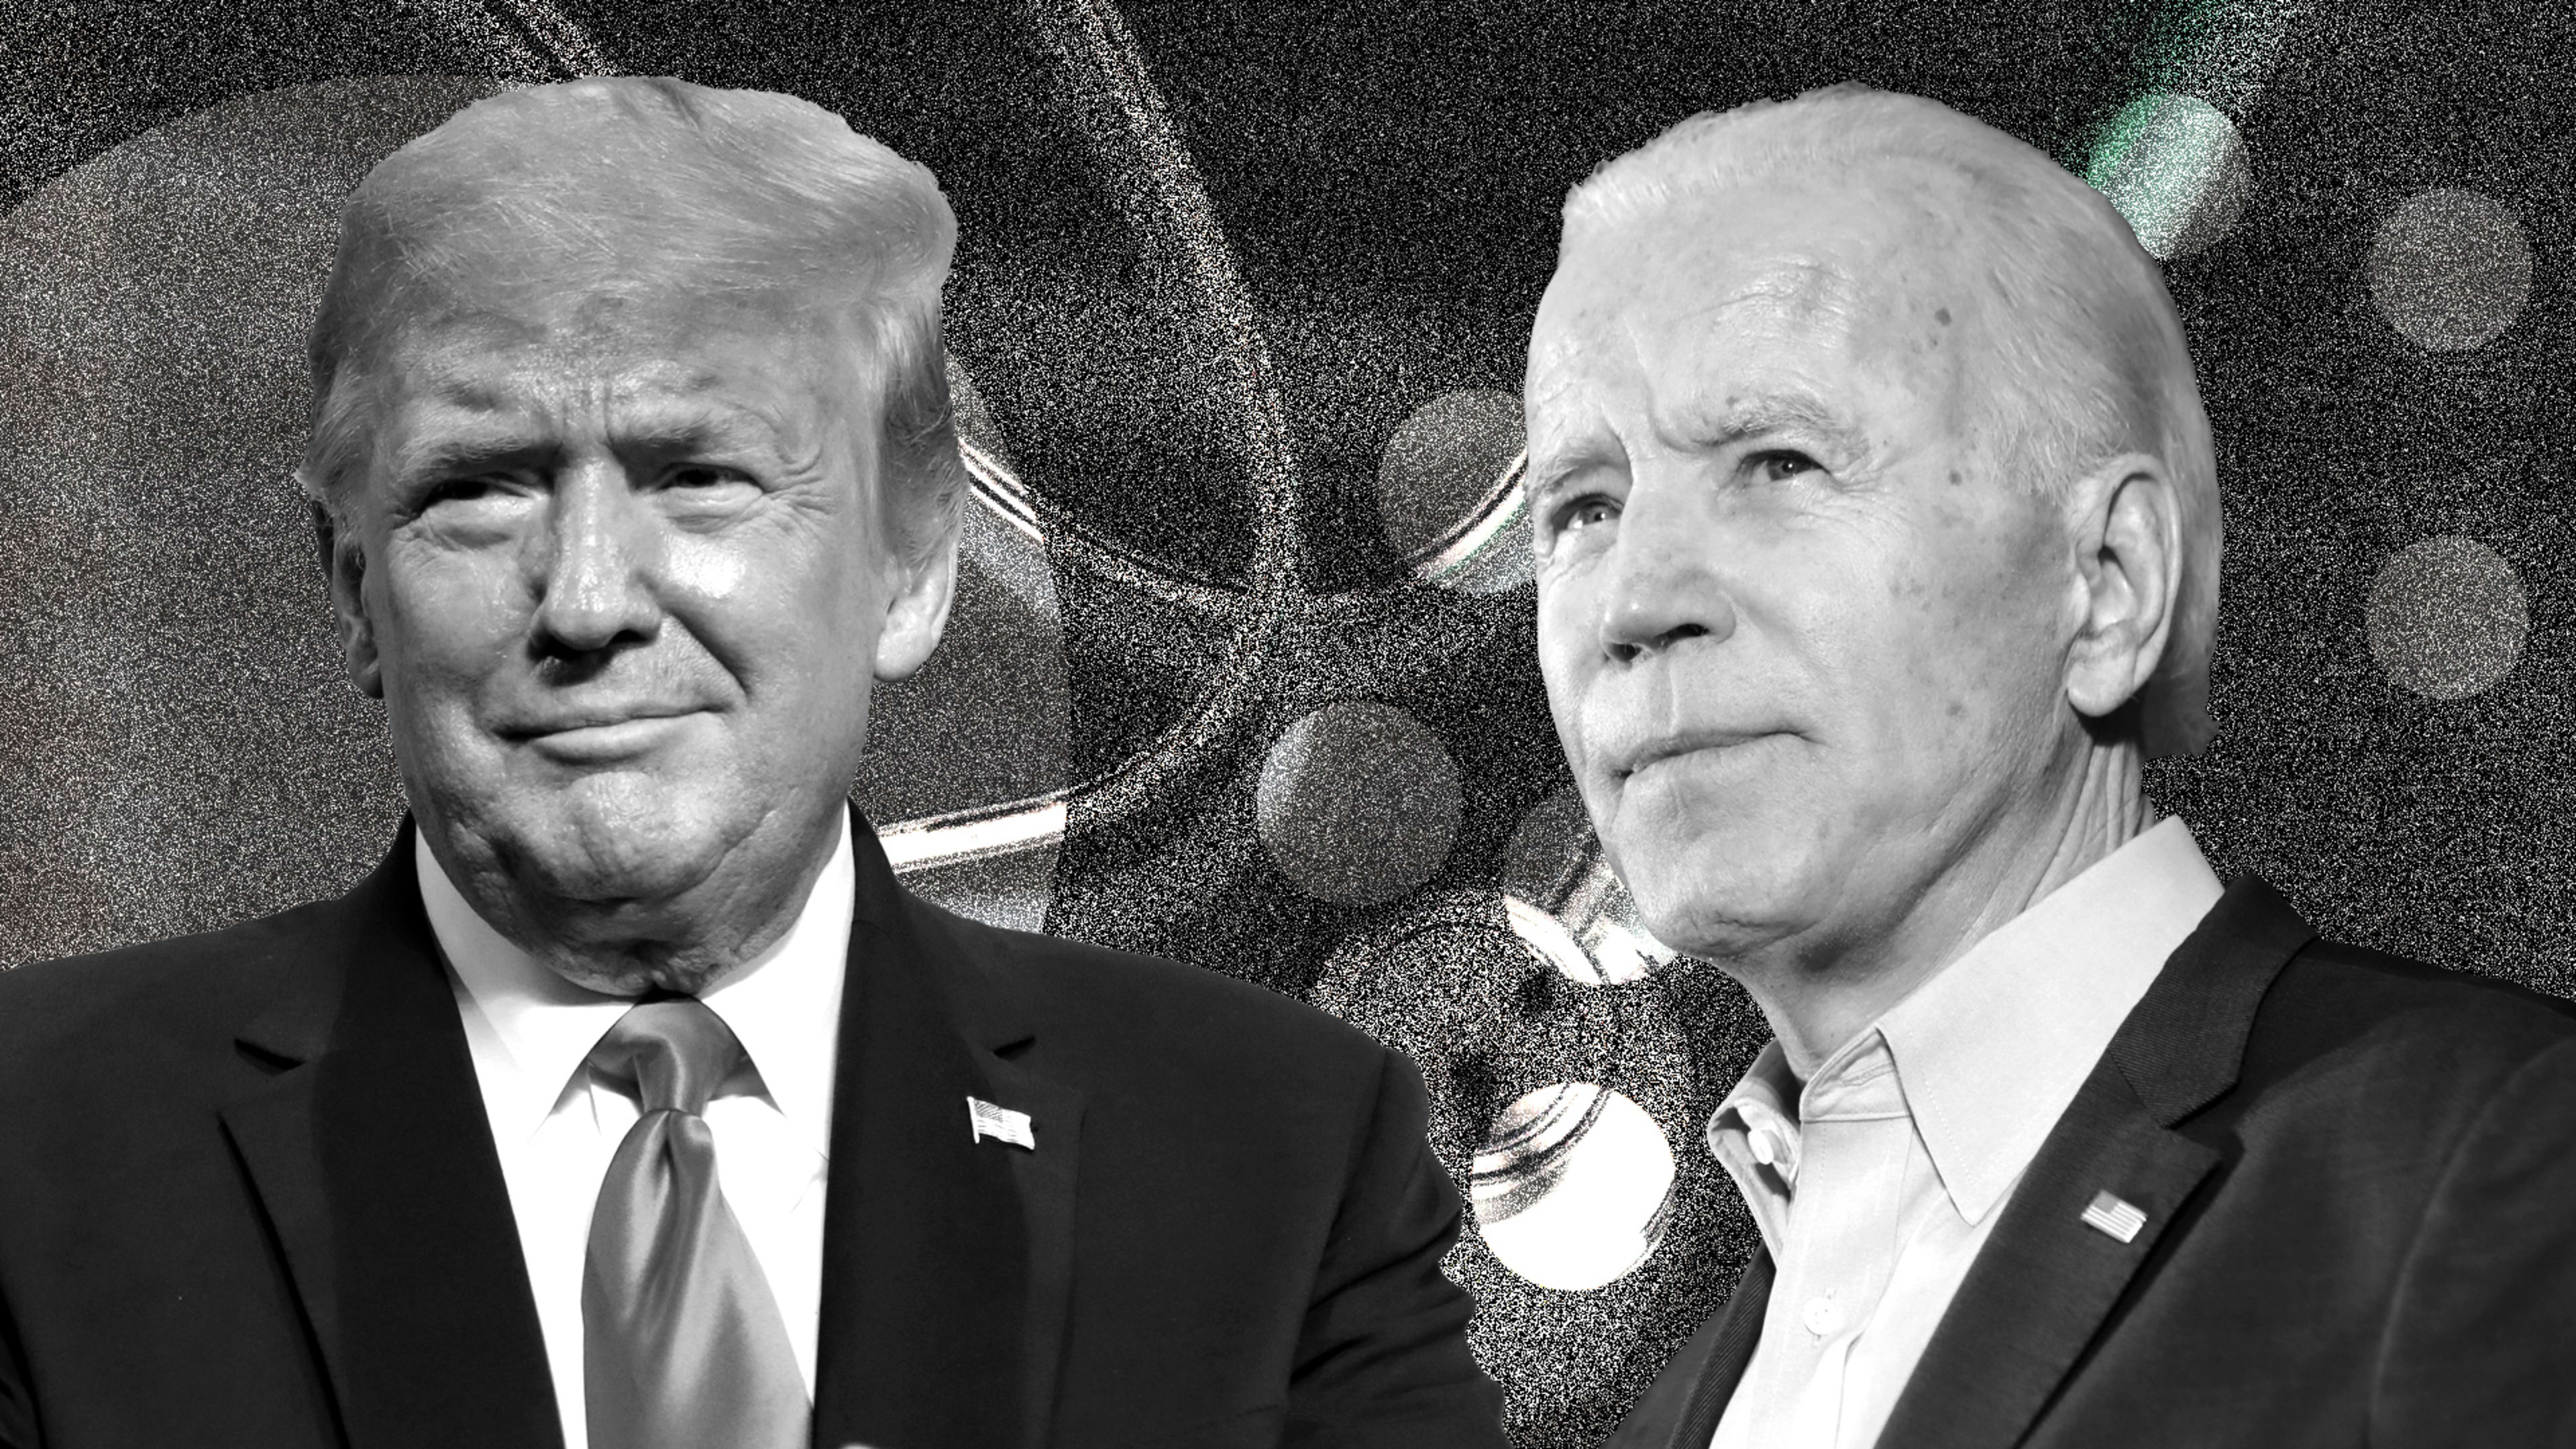 Biden and Trump have wildly different visions for healthcare in America